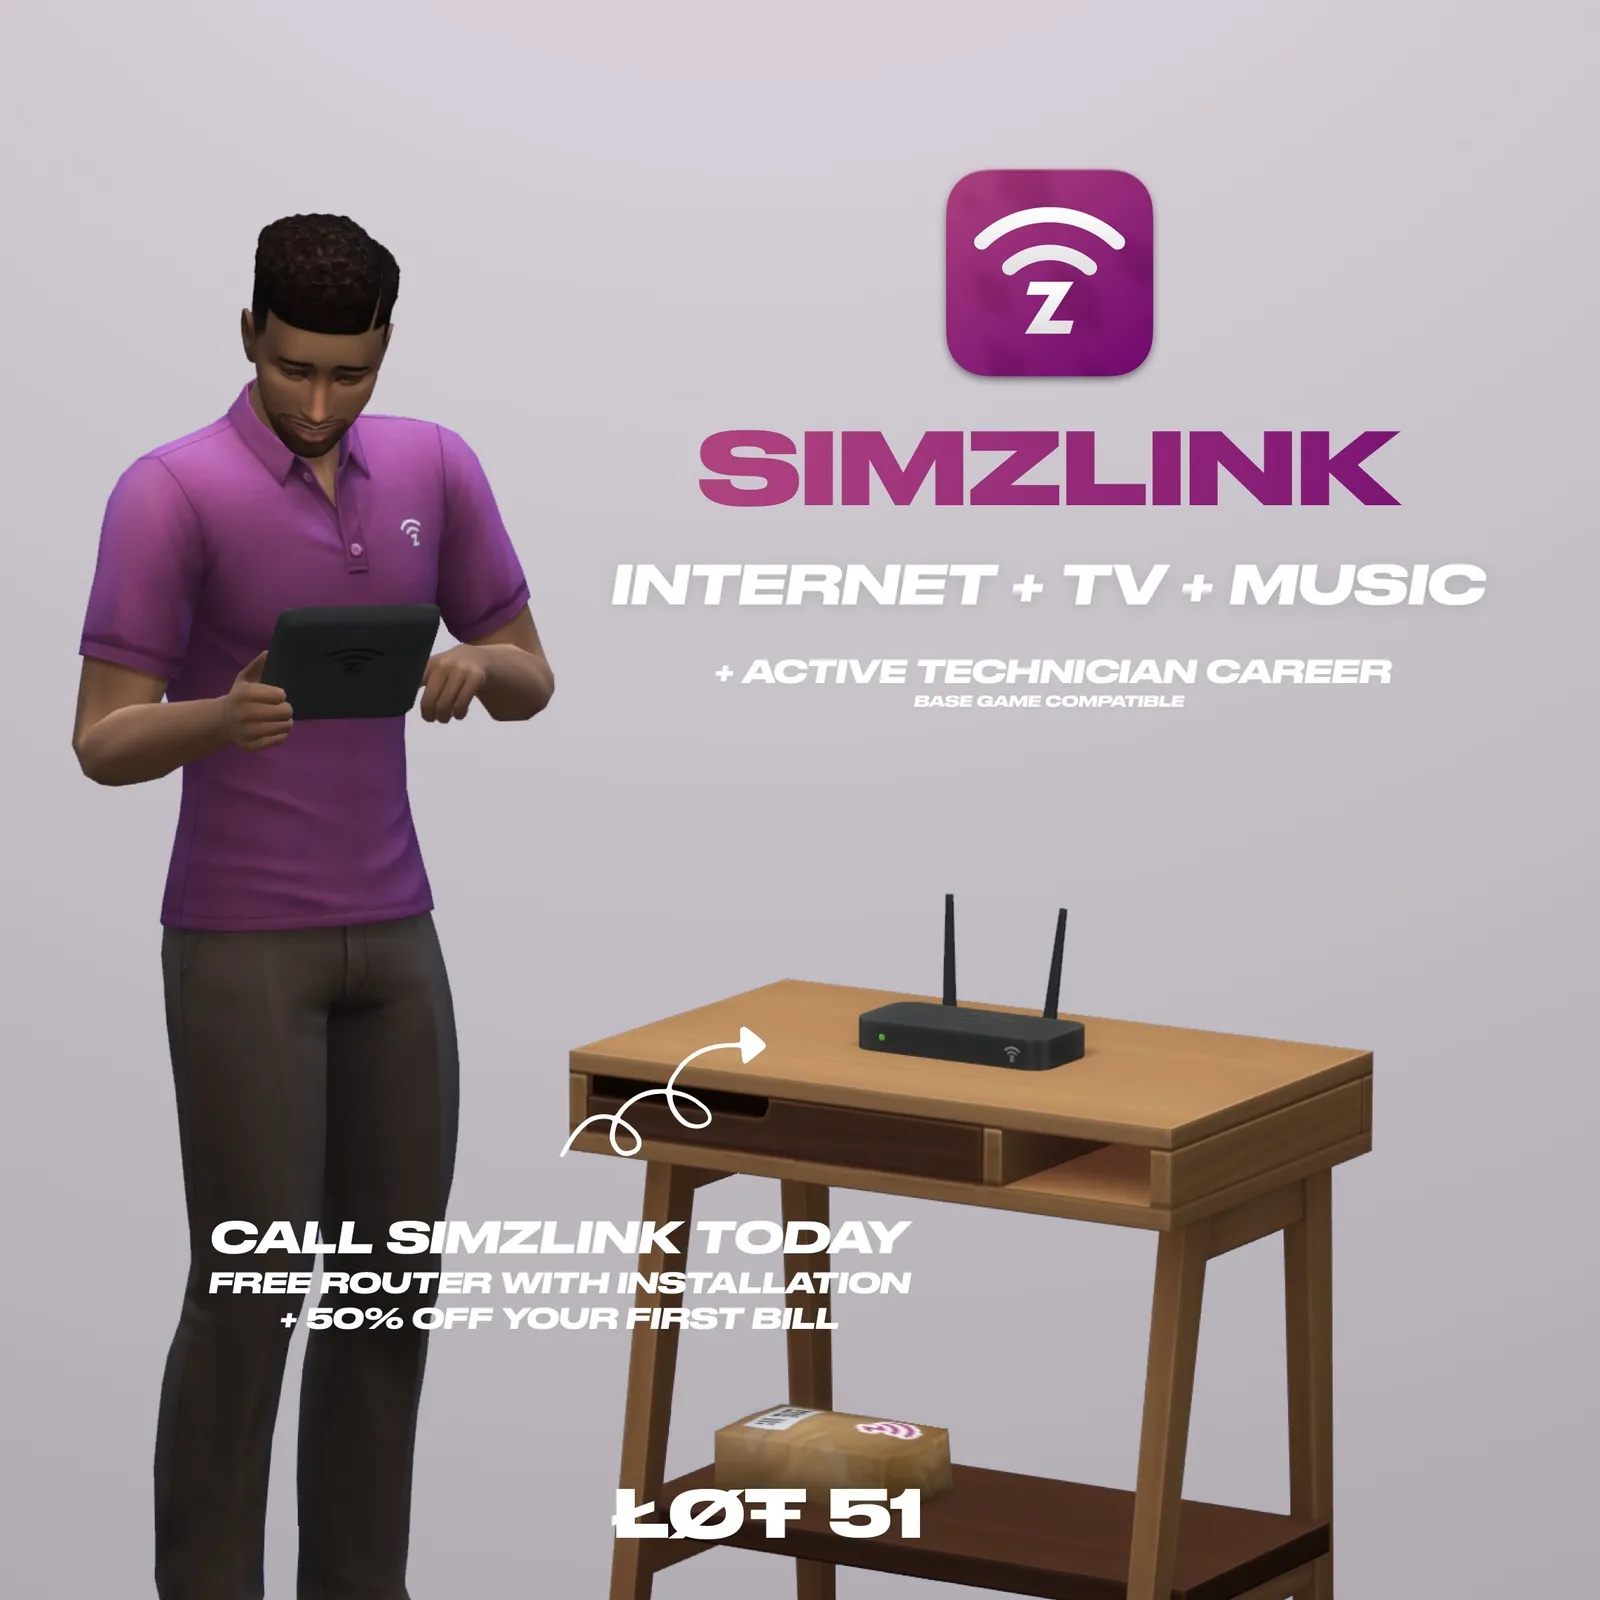 Simzlink Internet Service + Active Career (Now Available to the Public with v0.1.1)